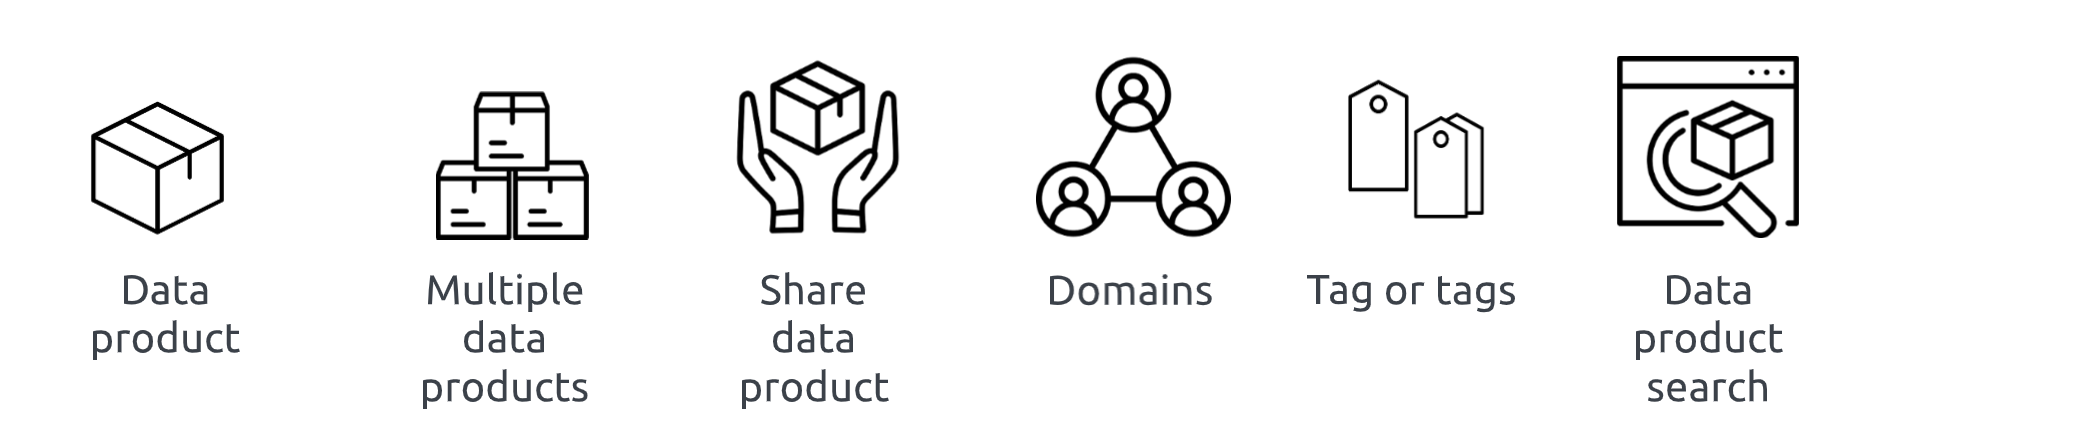 Icons depicting data product-related items